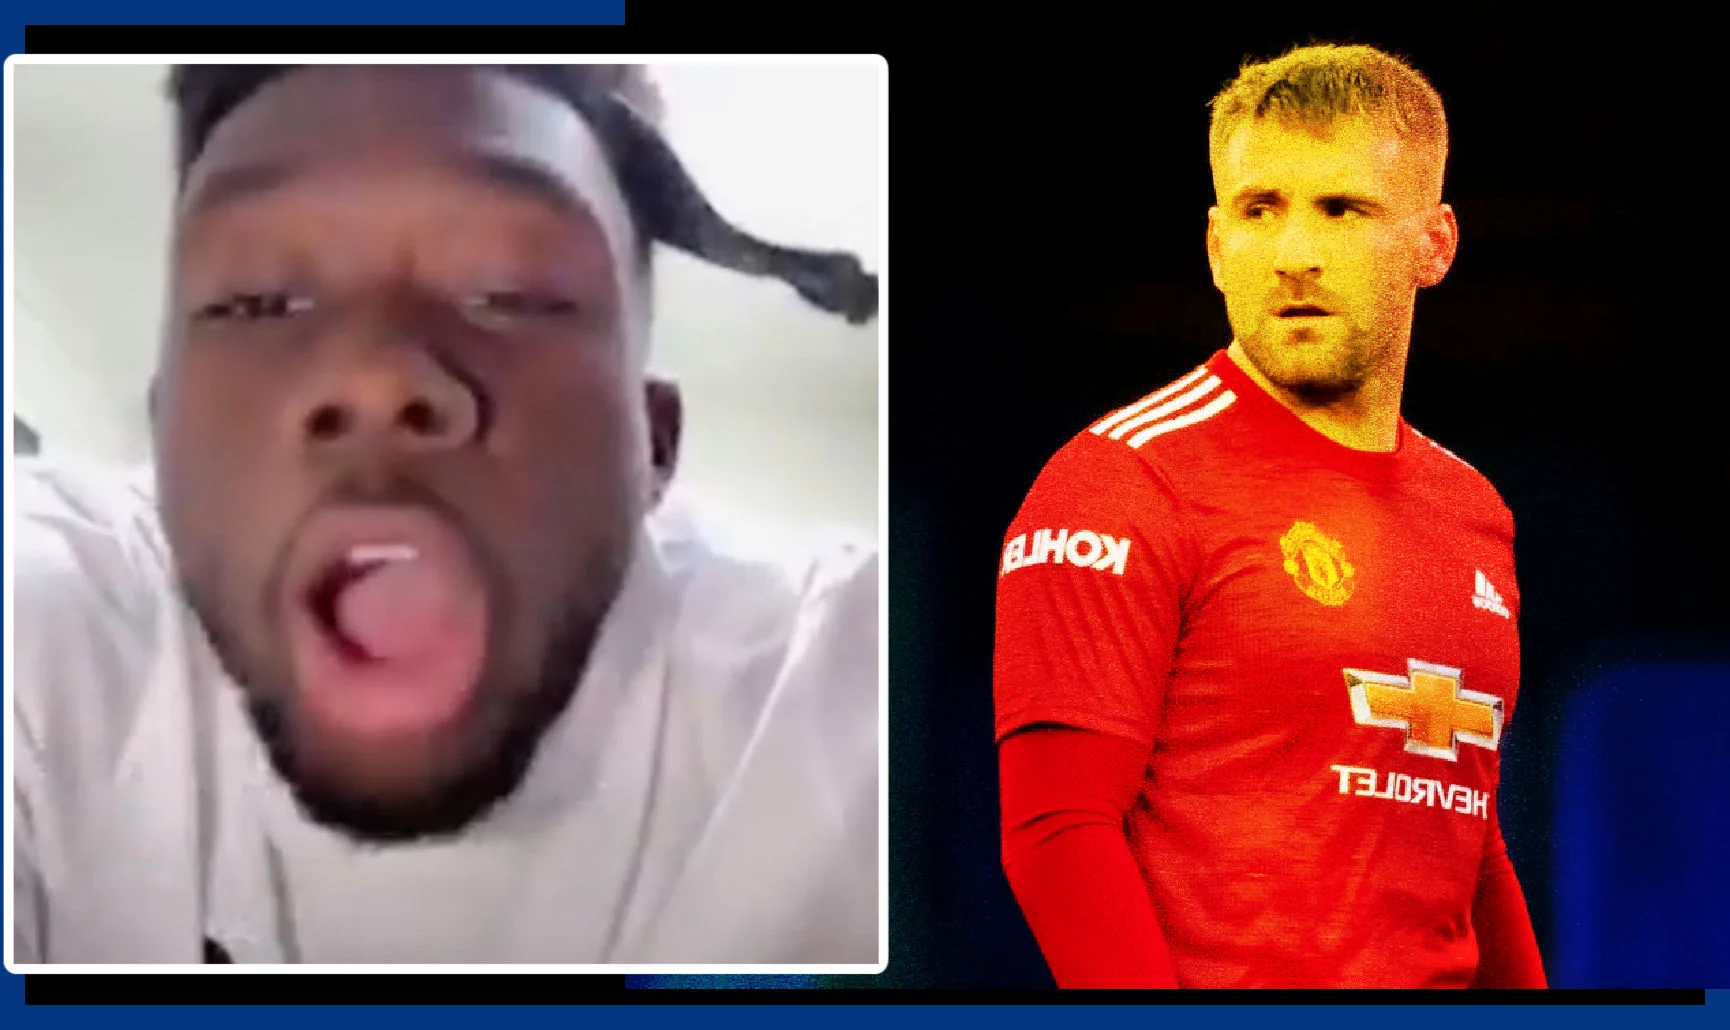 Alphonso Davies reacts to being told that the Luke Shaw is 'clear of' him on TikTok